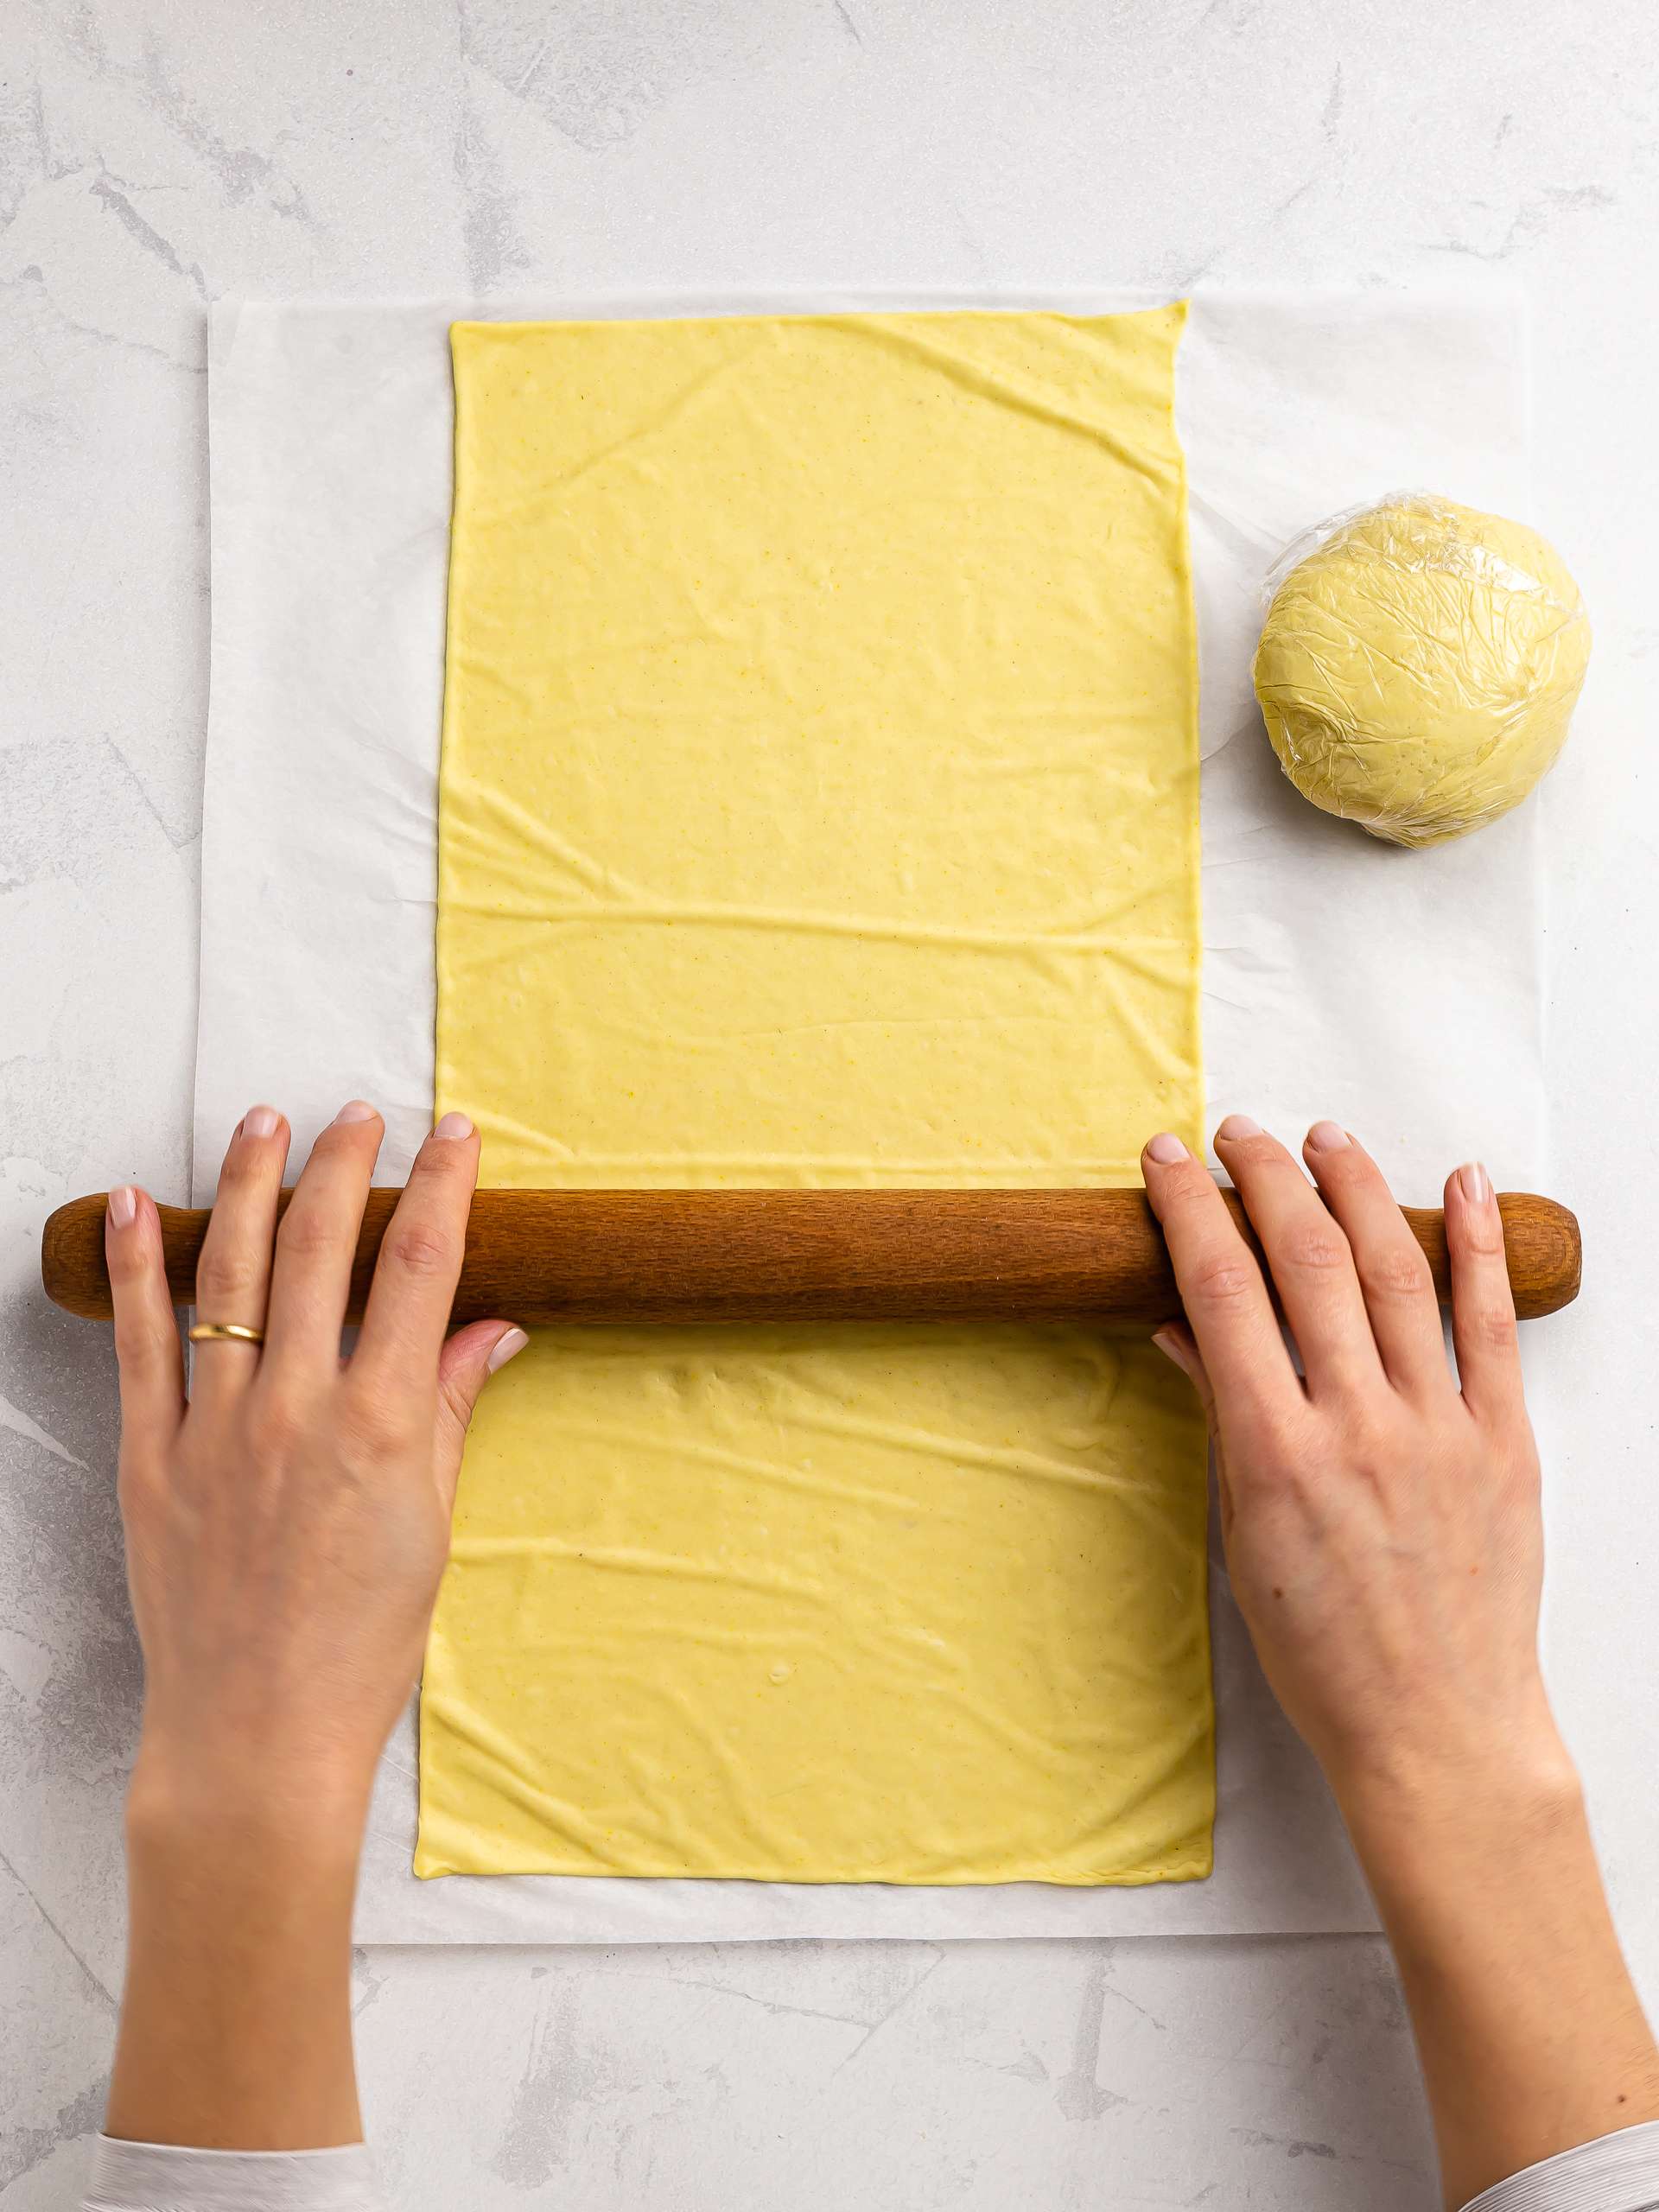 woman rolling out a sheet of pasta dough